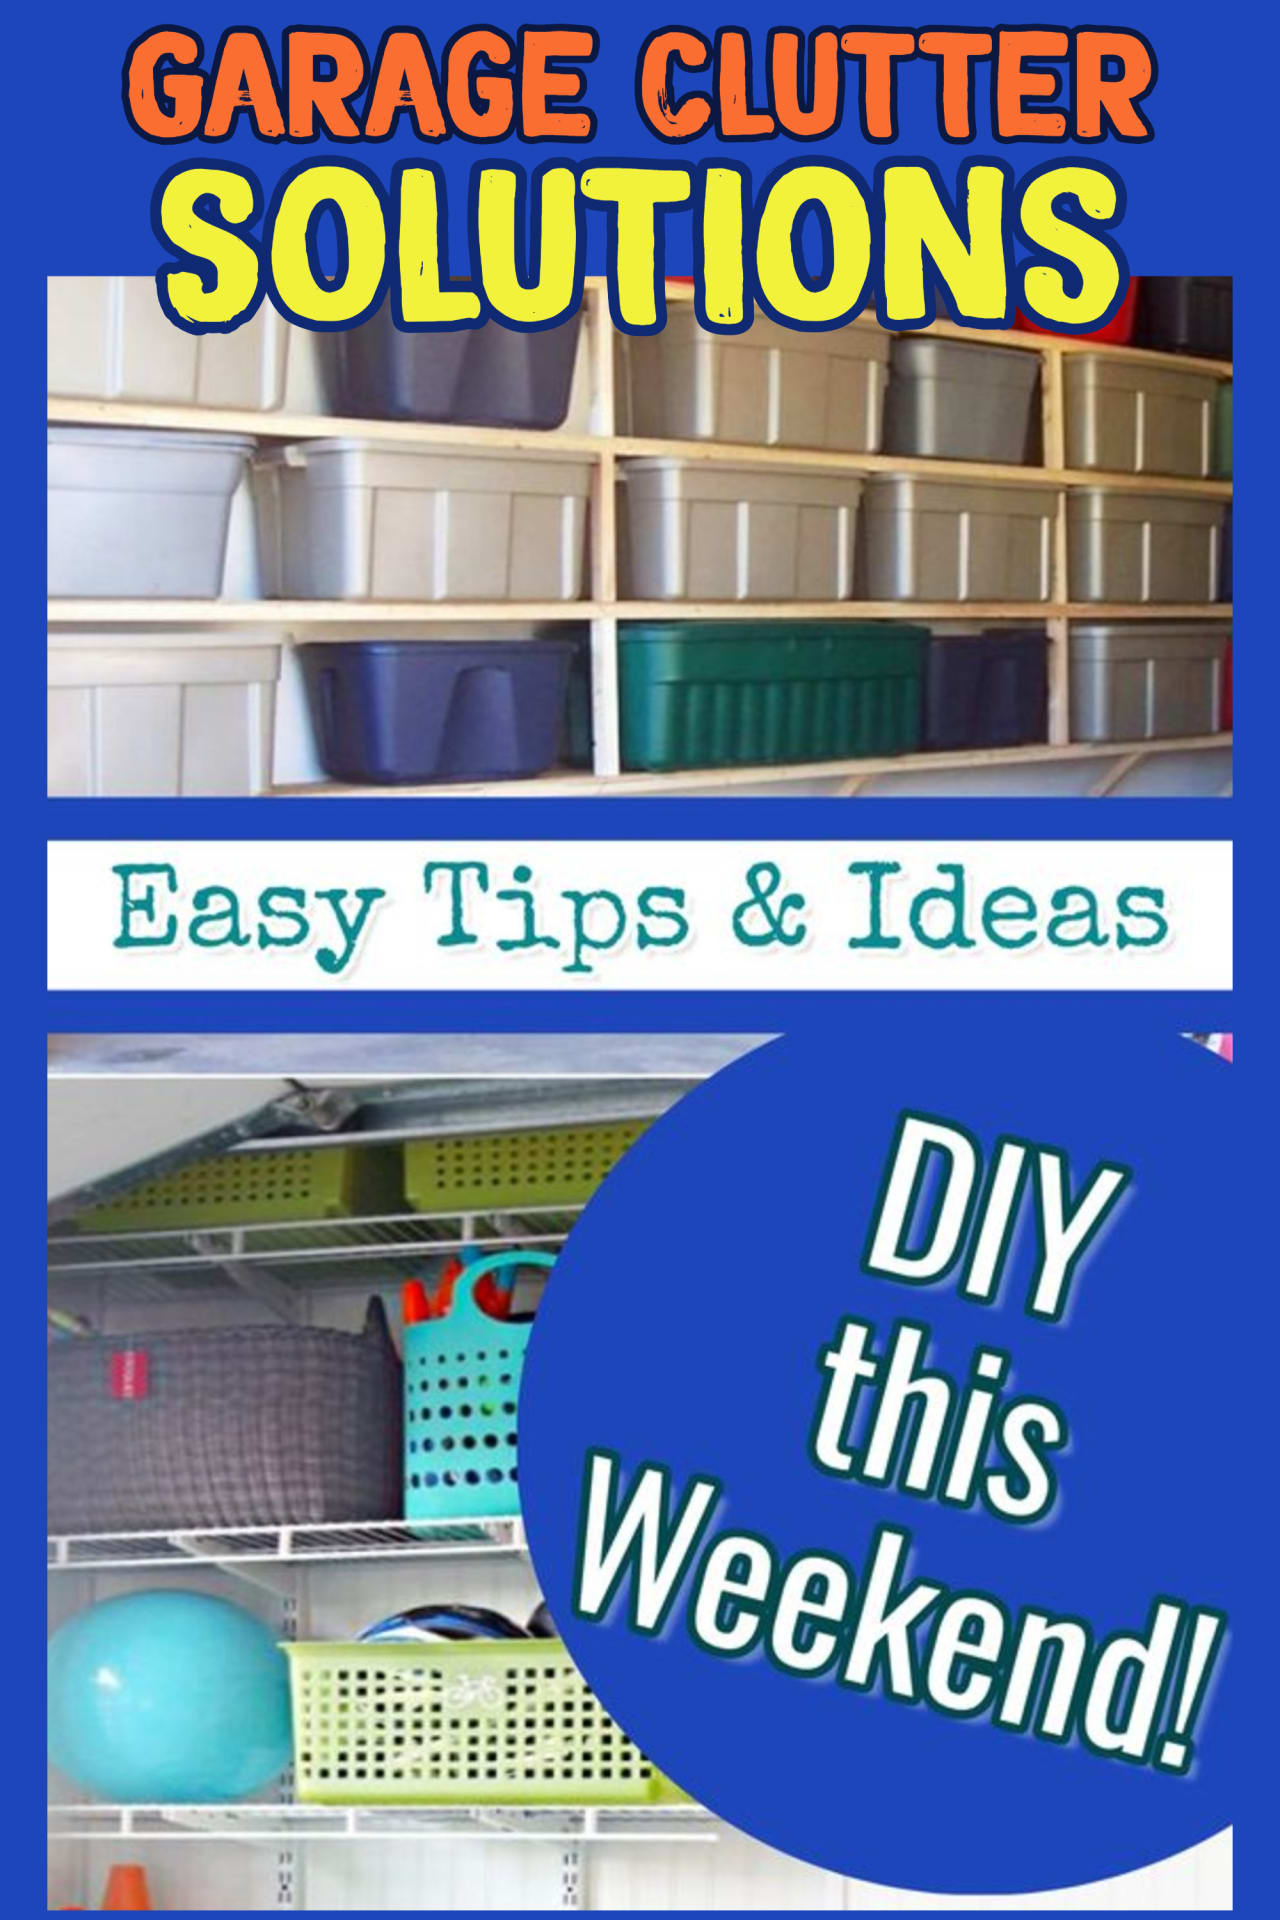 Garage Clutter Storage Solutions!  Ready to declutter and organize your garage?  These garage storage and organization hacks are some of the best organizing tips I've found.  Cheap and EASY ways to organize your garage fast!